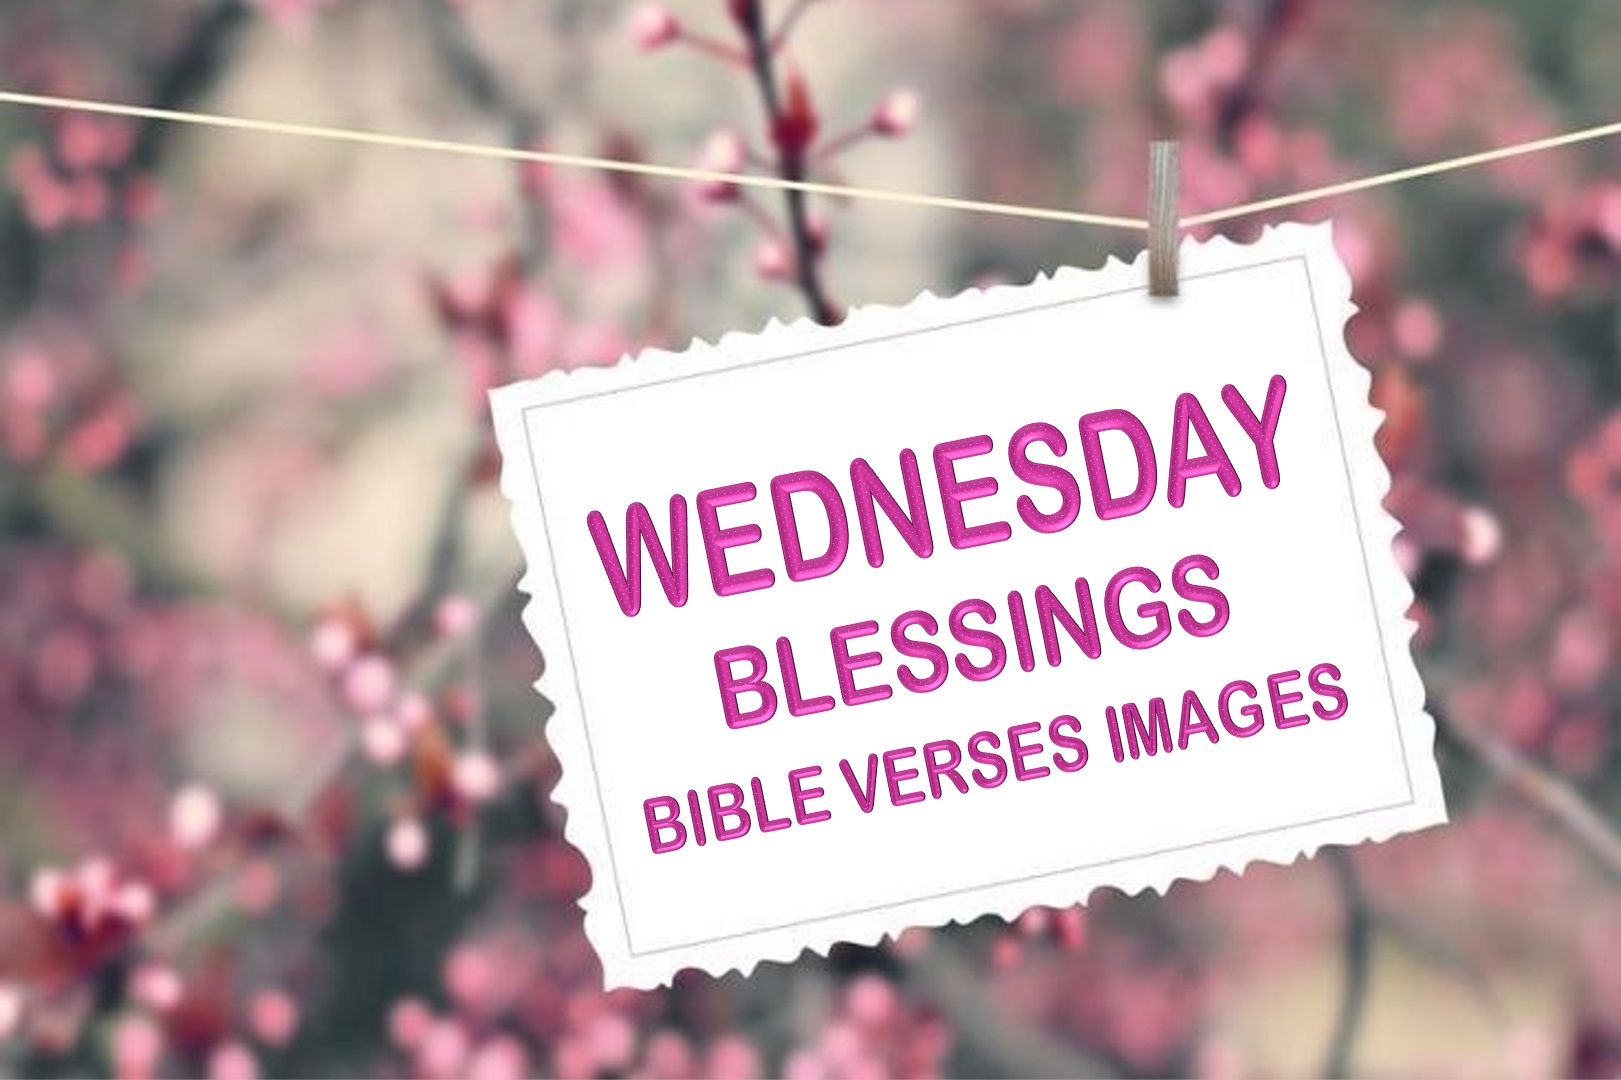 Best Wednesday Blessings Bible Verses Images | SuperbWishes